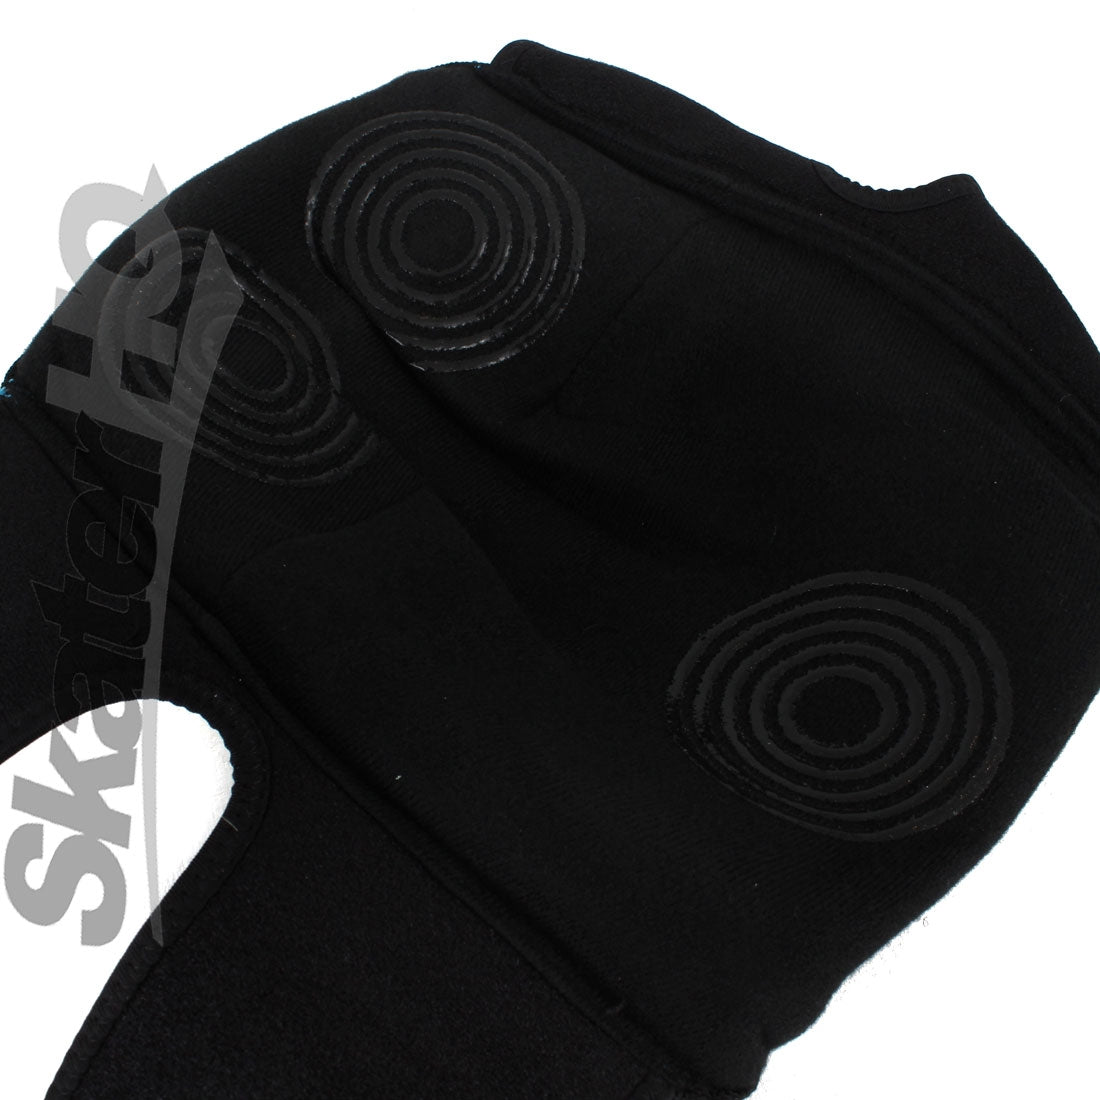 TSG Force V Arti-Lage Kneepads - Small Protective Gear